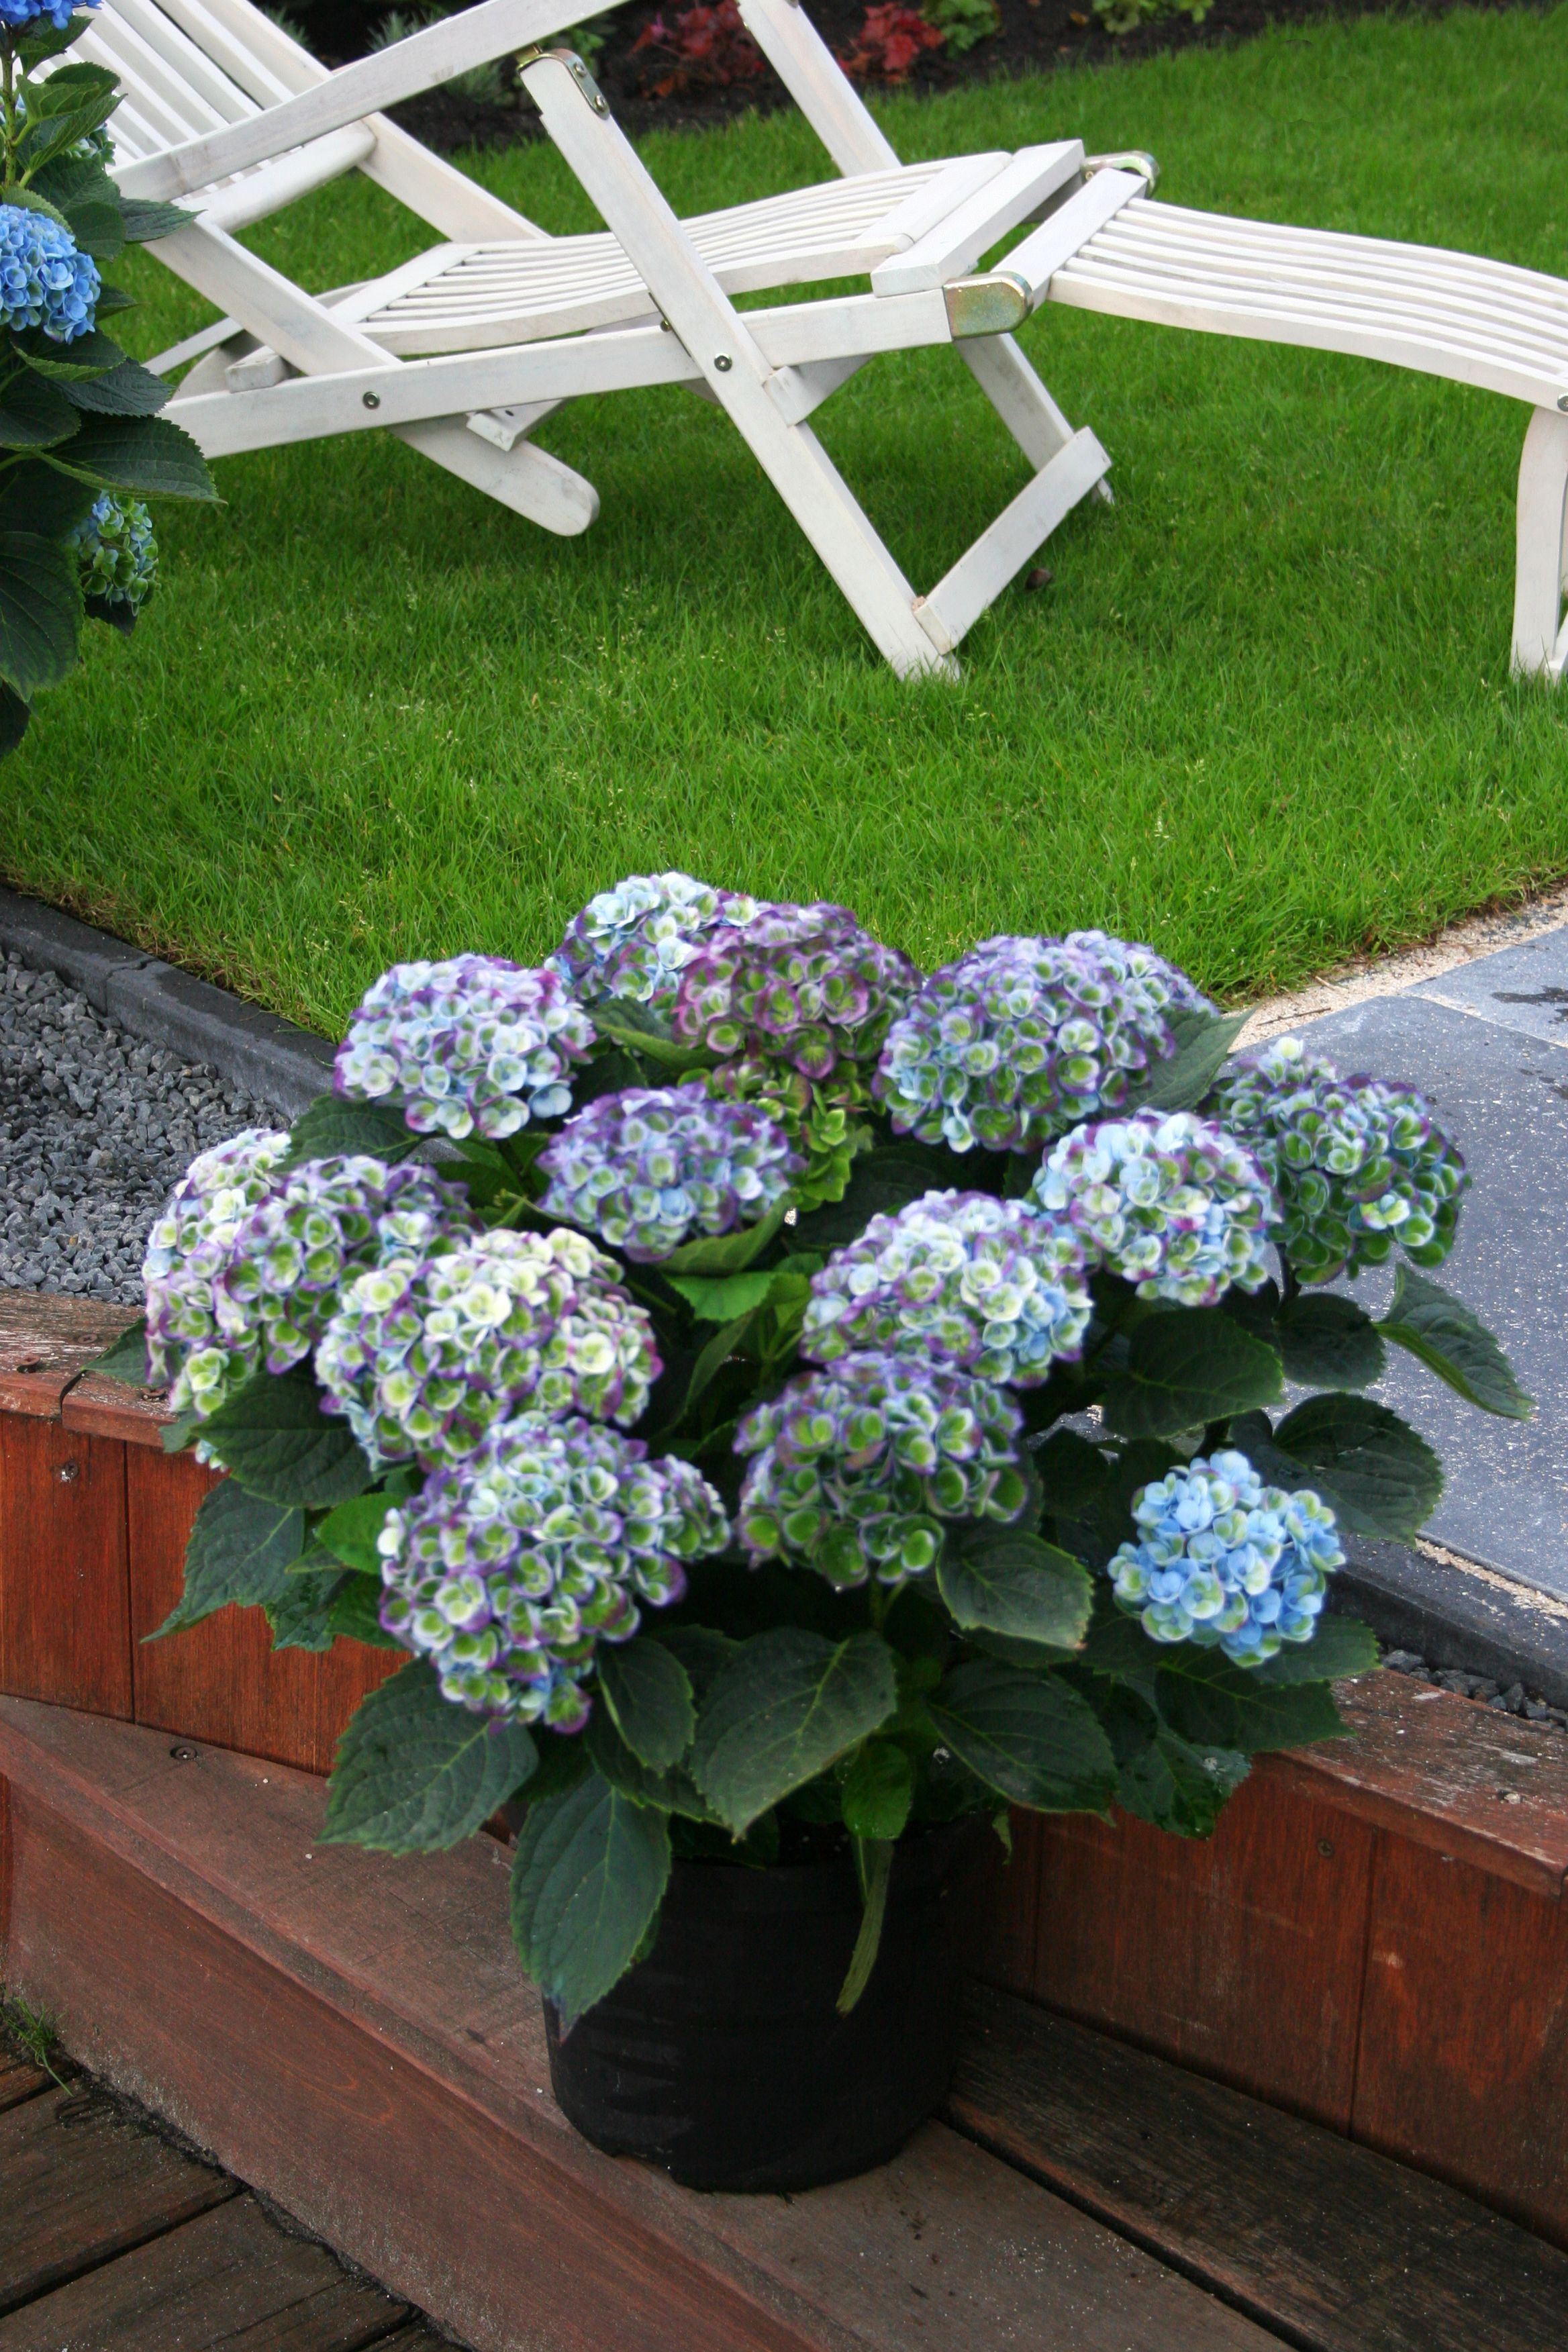 images/plants/hydrangea/hyd-magical-everlasting-revolution/hyd-magical-everlasting-revolution-0009.jpg